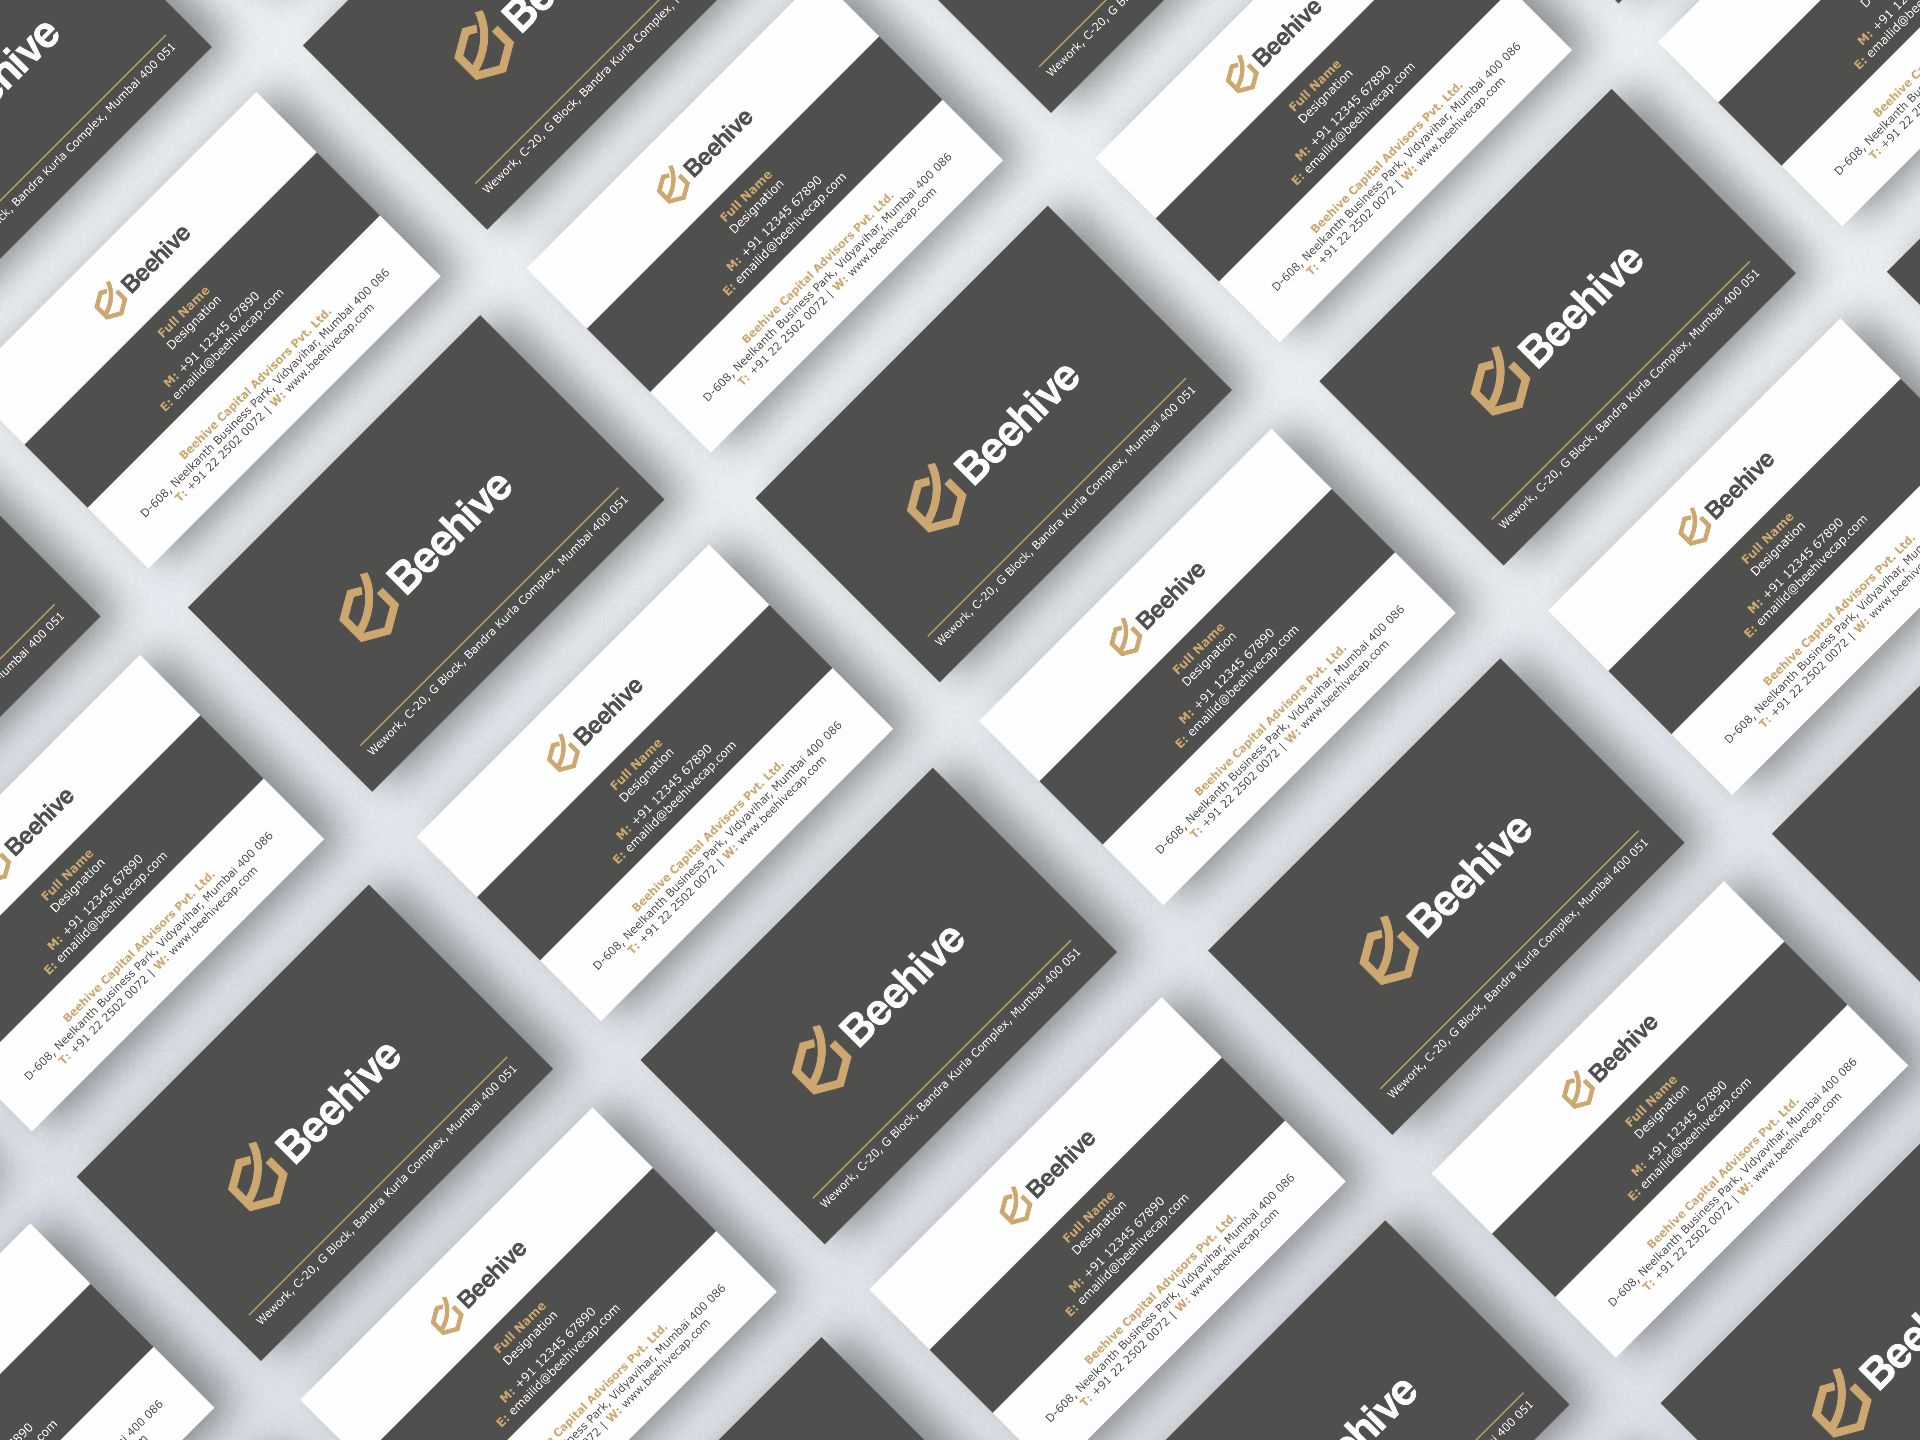 Beehive Capital Advisors - Business Cards